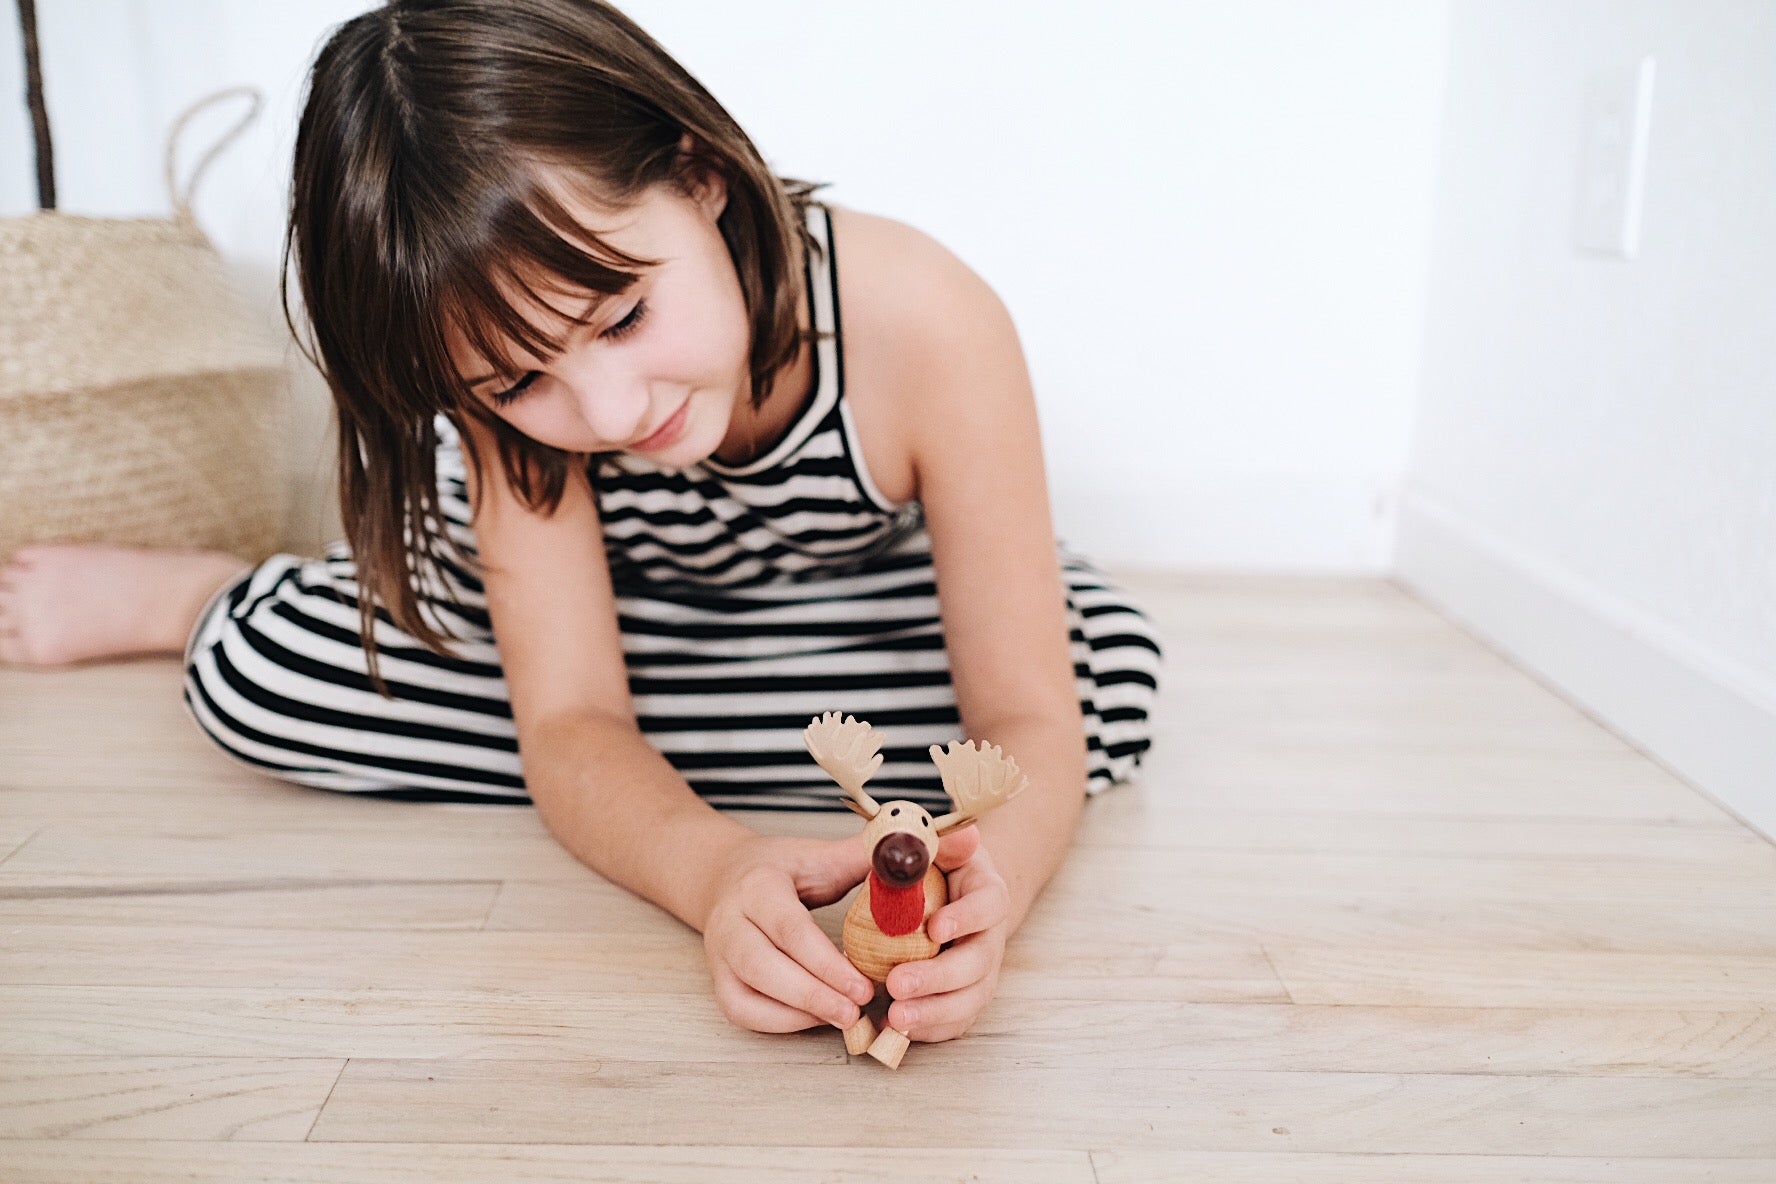 Adorable eco-friendly wooden moose toy with a cheeky smile, perfect for imaginative play and learning